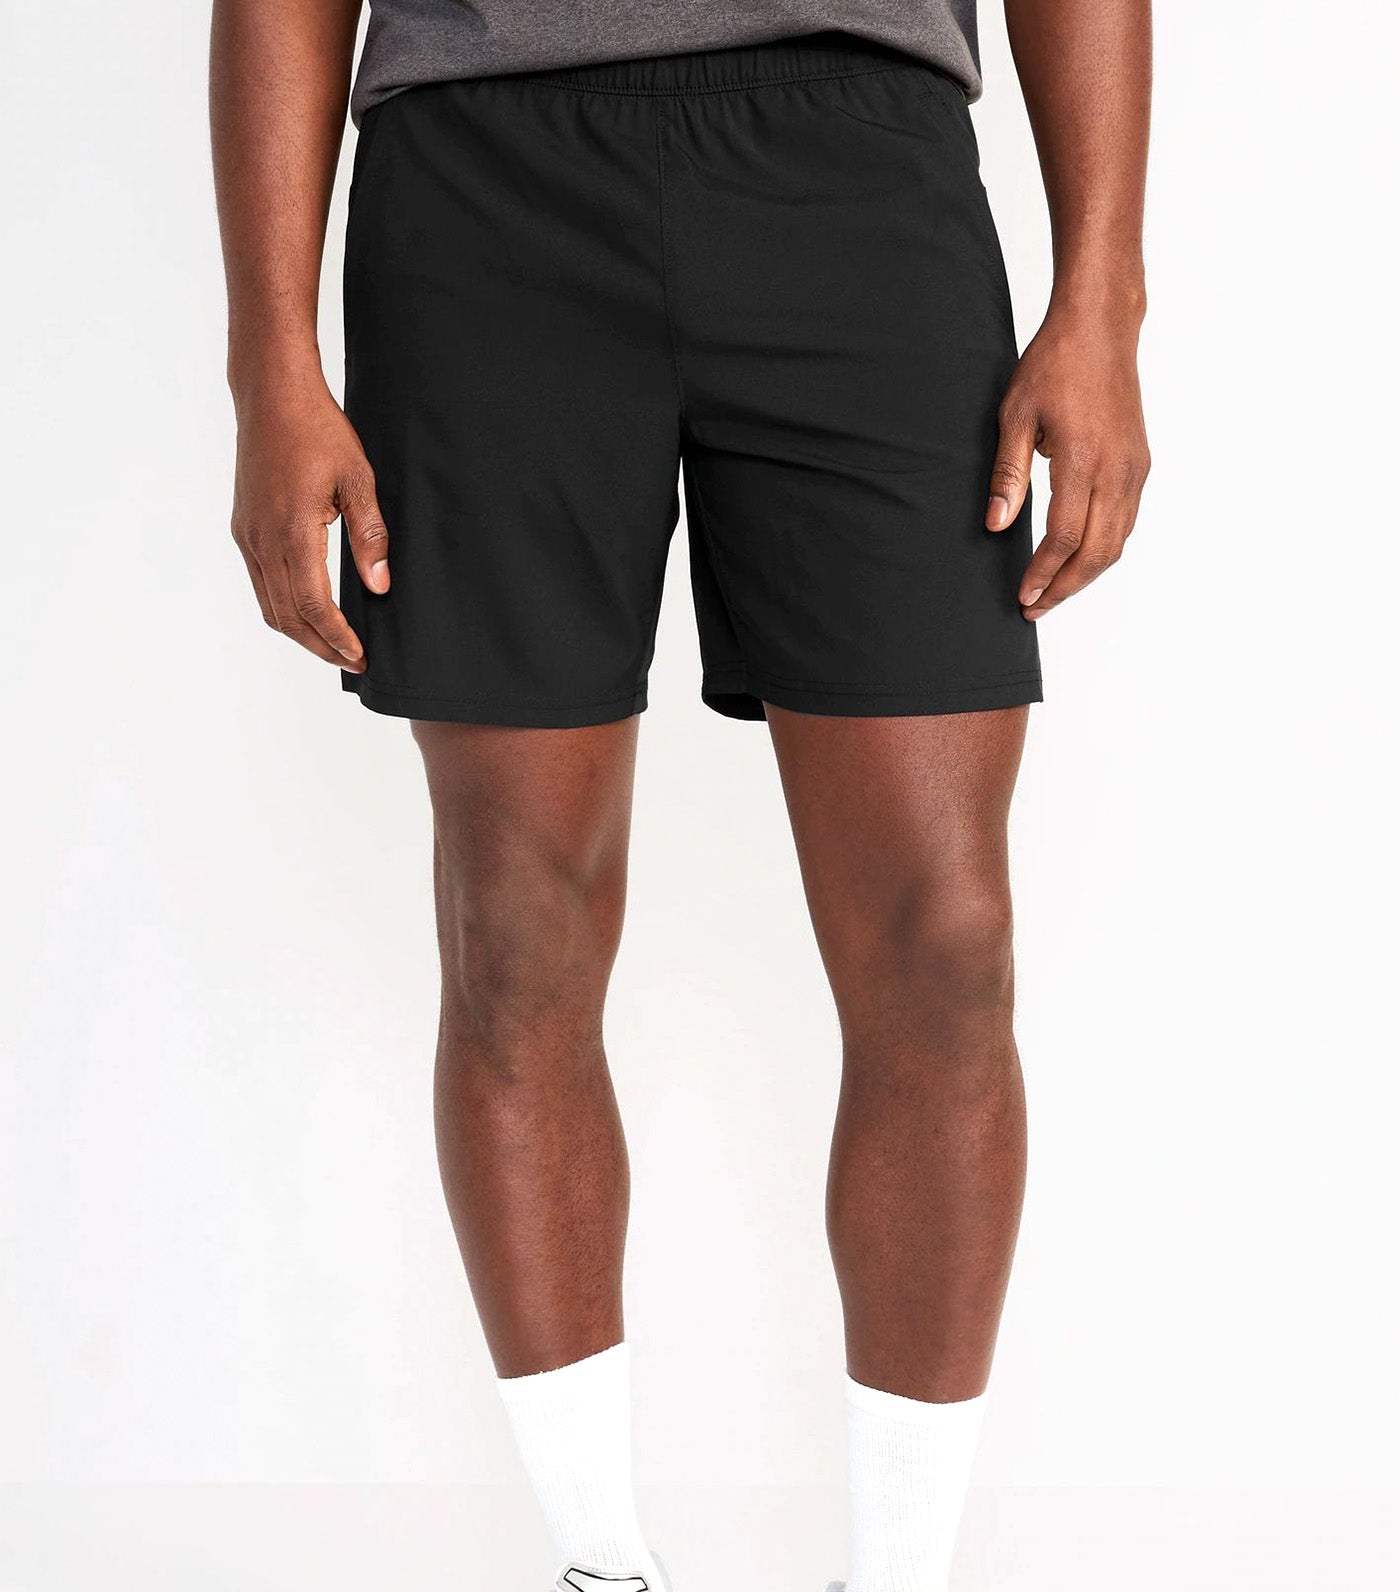 Essential Woven Workout Shorts for Men - 7-inch inseam Black Jack